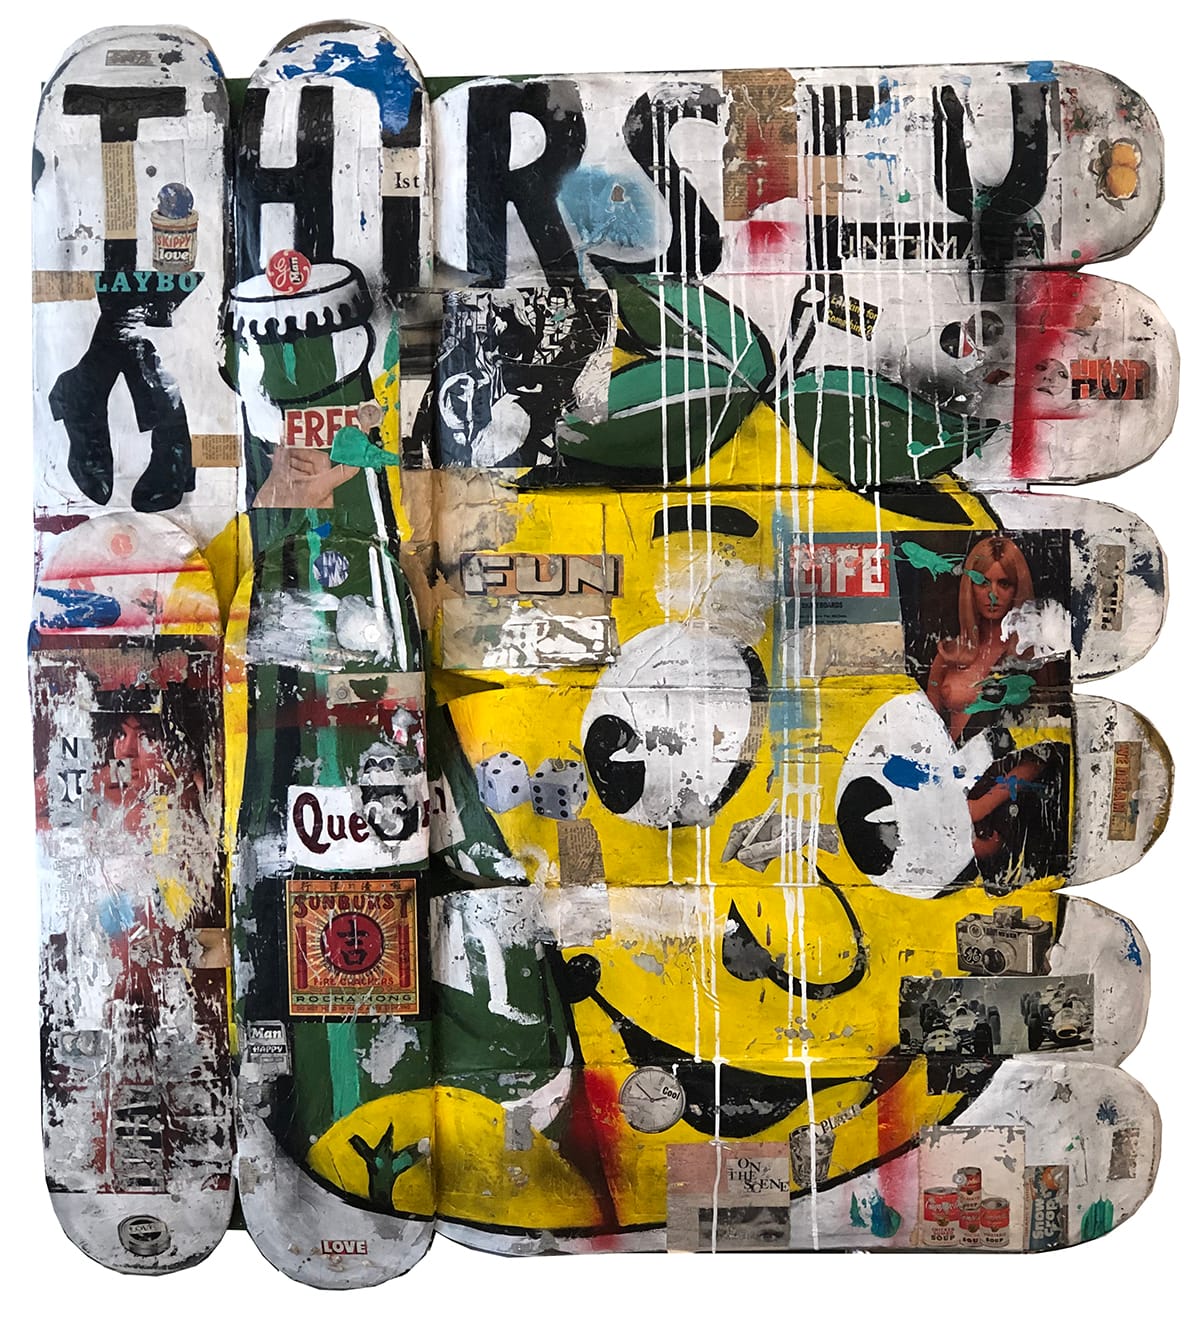 Thirsty_Greg_Miller_Acrylic_Paint_Spray_Paint_Collage_Paper_on_Skateboard_Planks_51_x_48